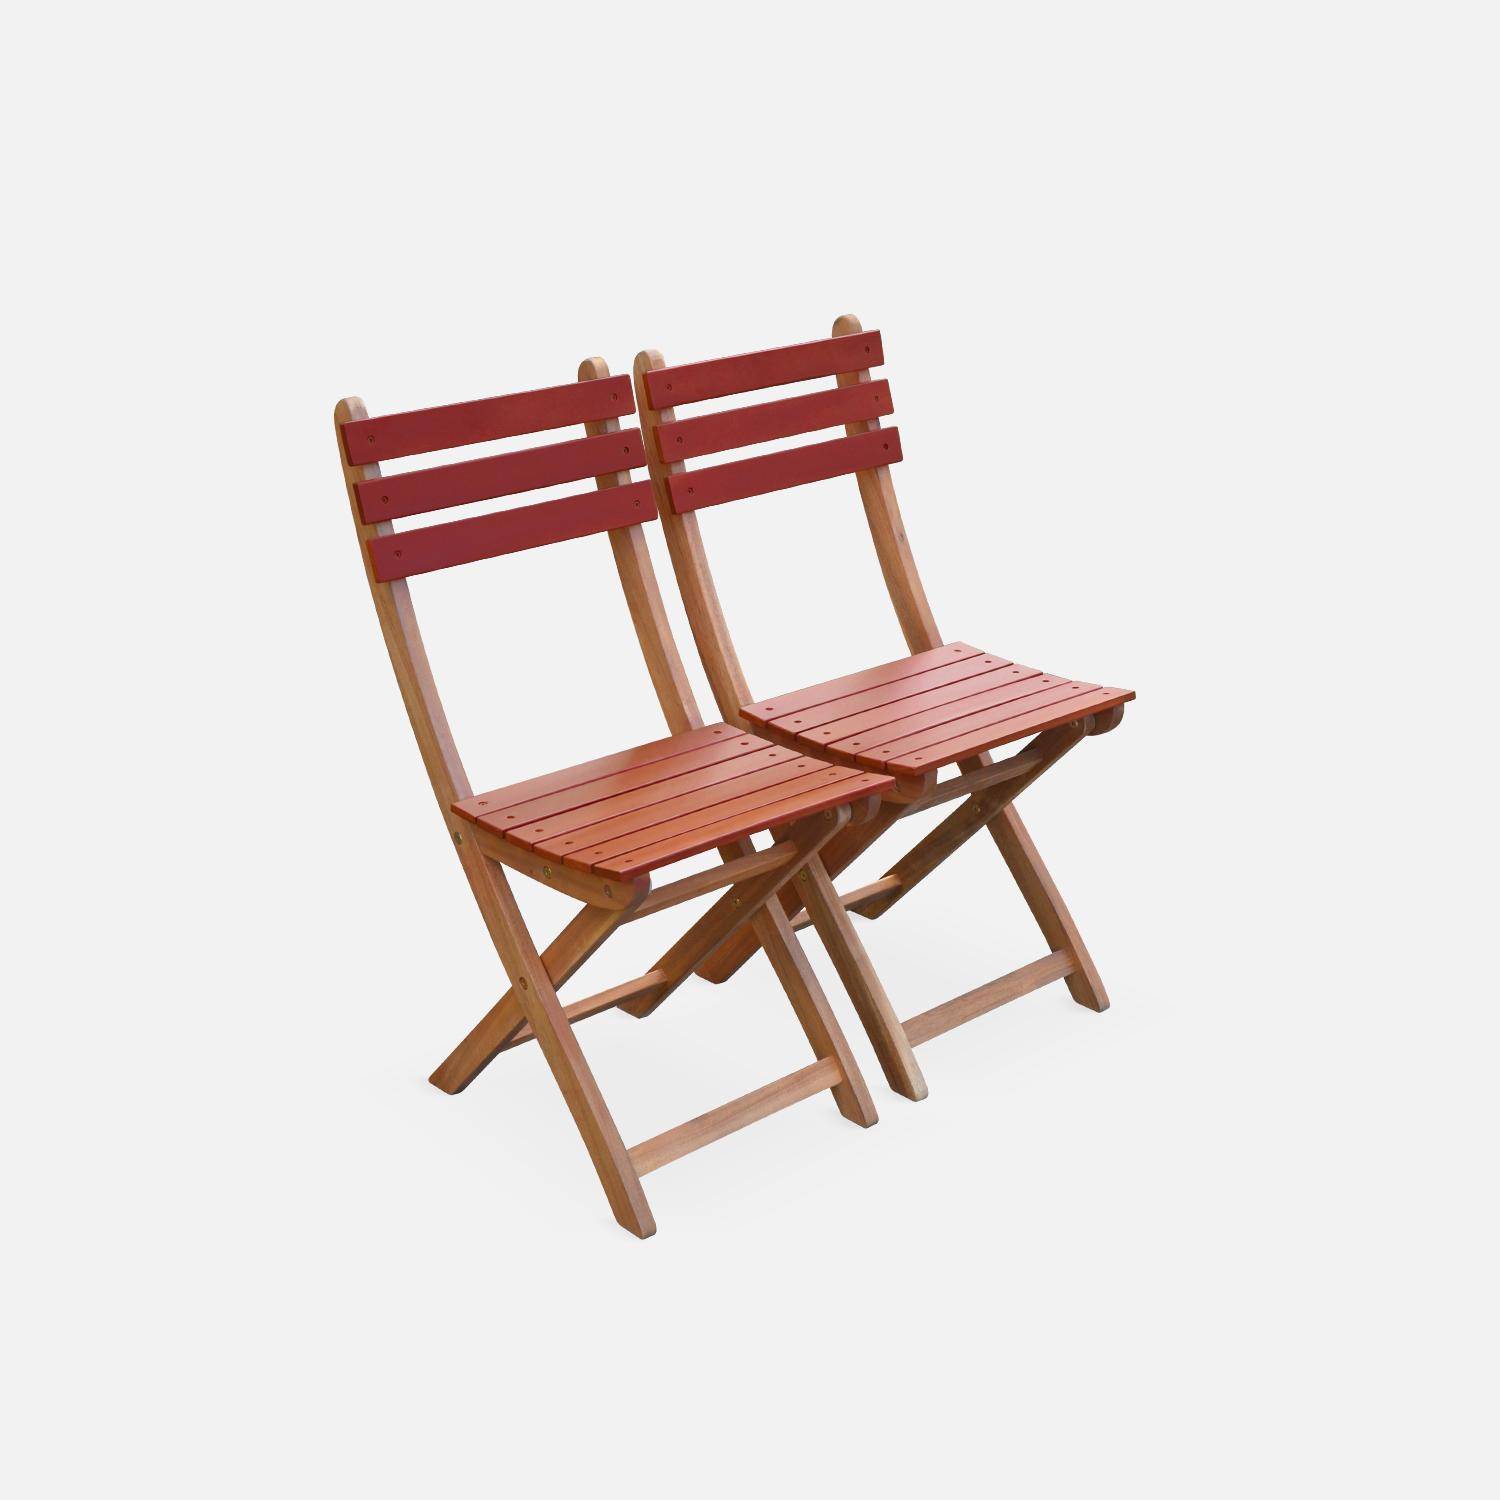 2-seater foldable wooden bistro garden table with chairs, 60x60cm - Barcelona - Terracotta Photo5